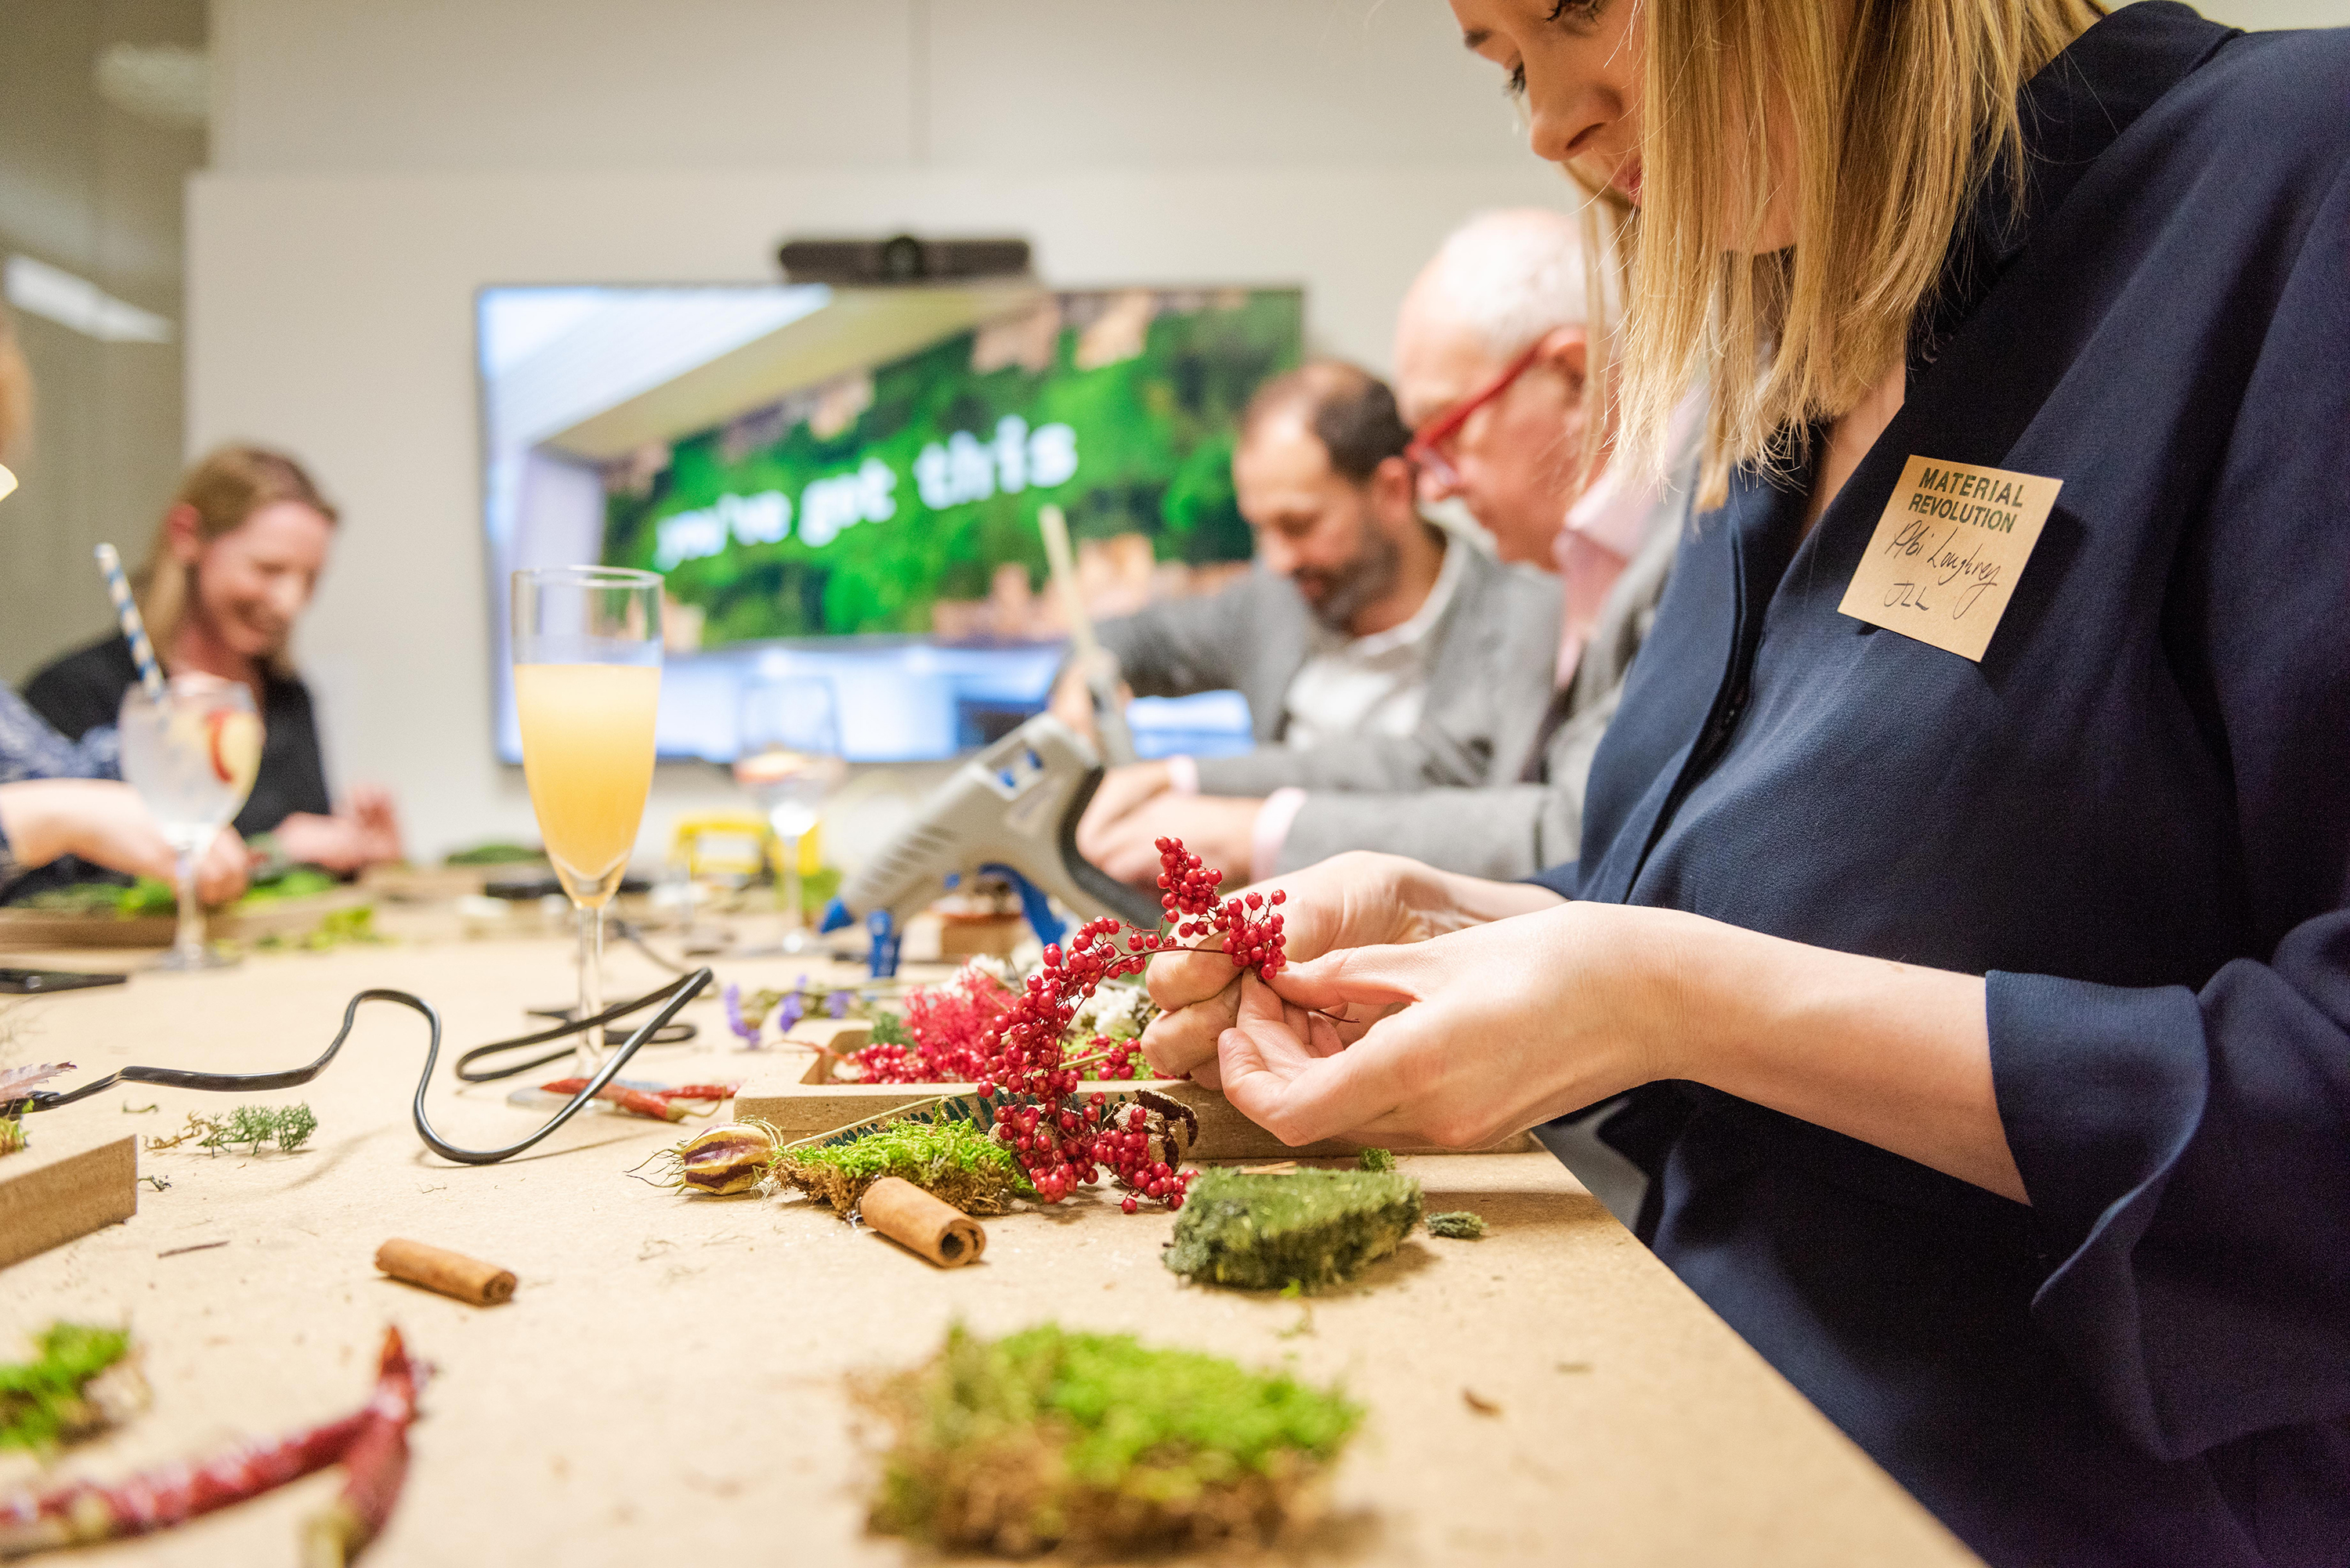 Creating masterpieces at the 'hands on' moss workshop